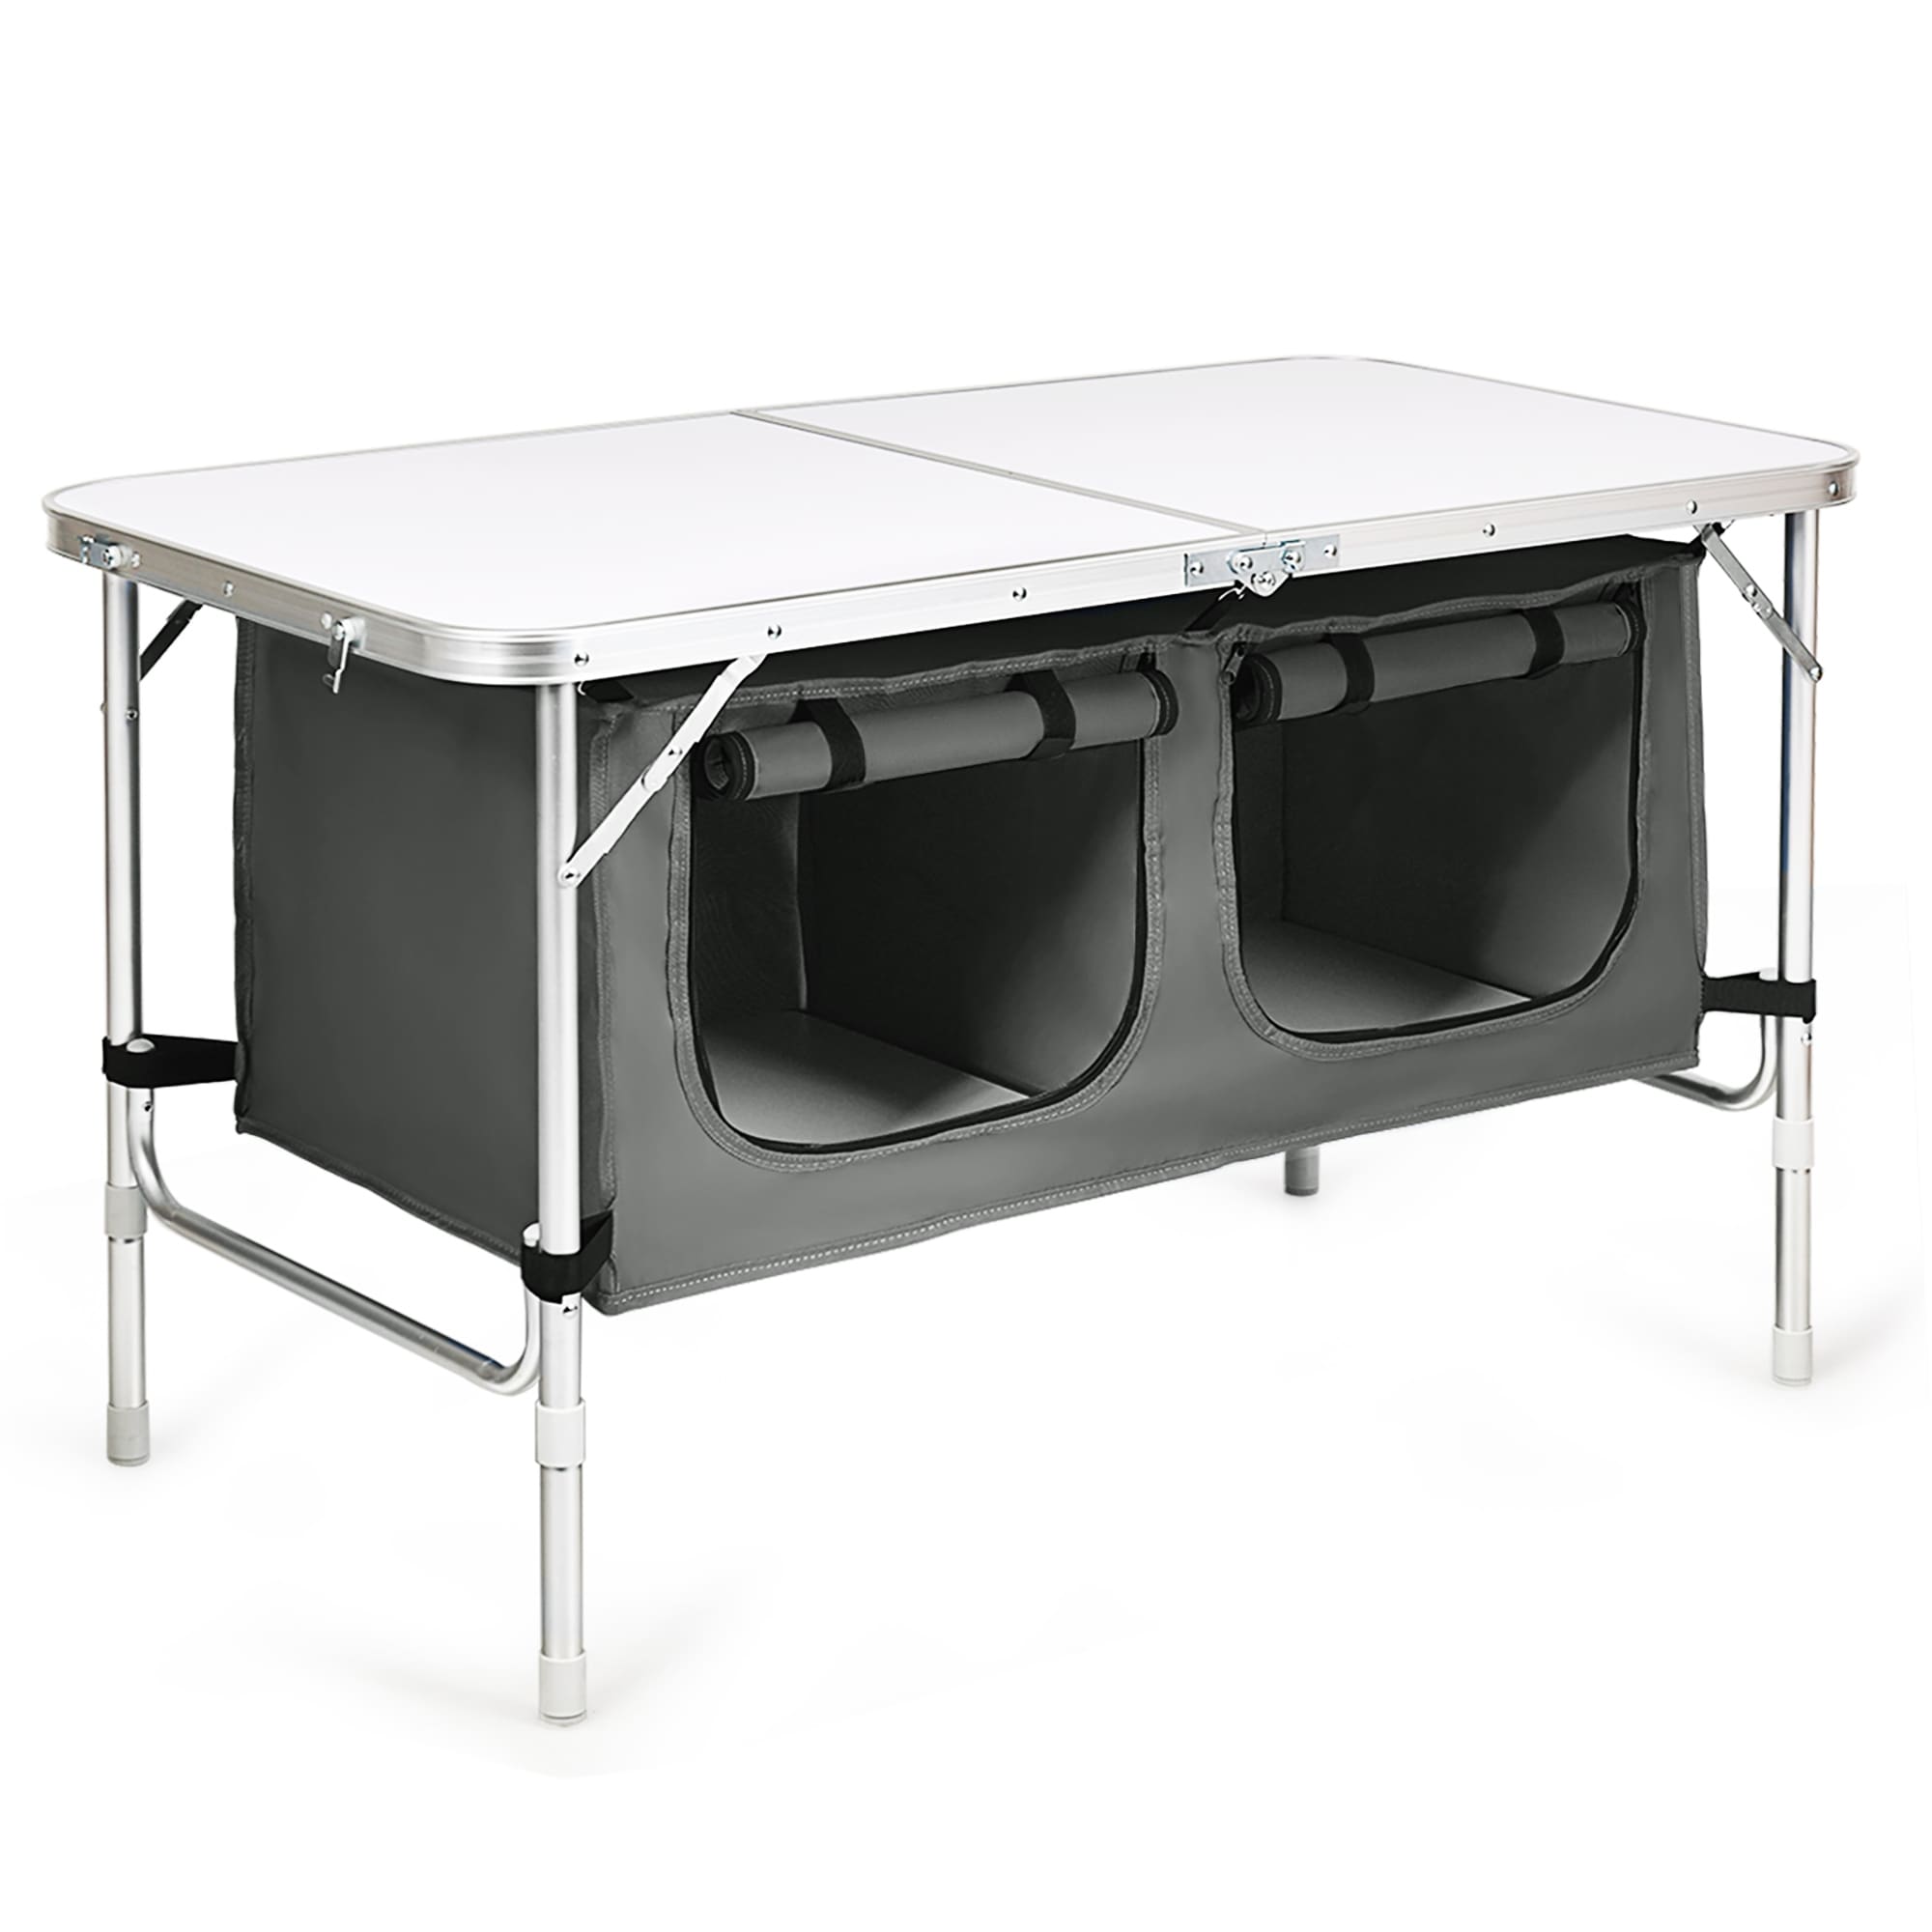 Aluminum Lightweight Portable Camping Table With Storage Organizer